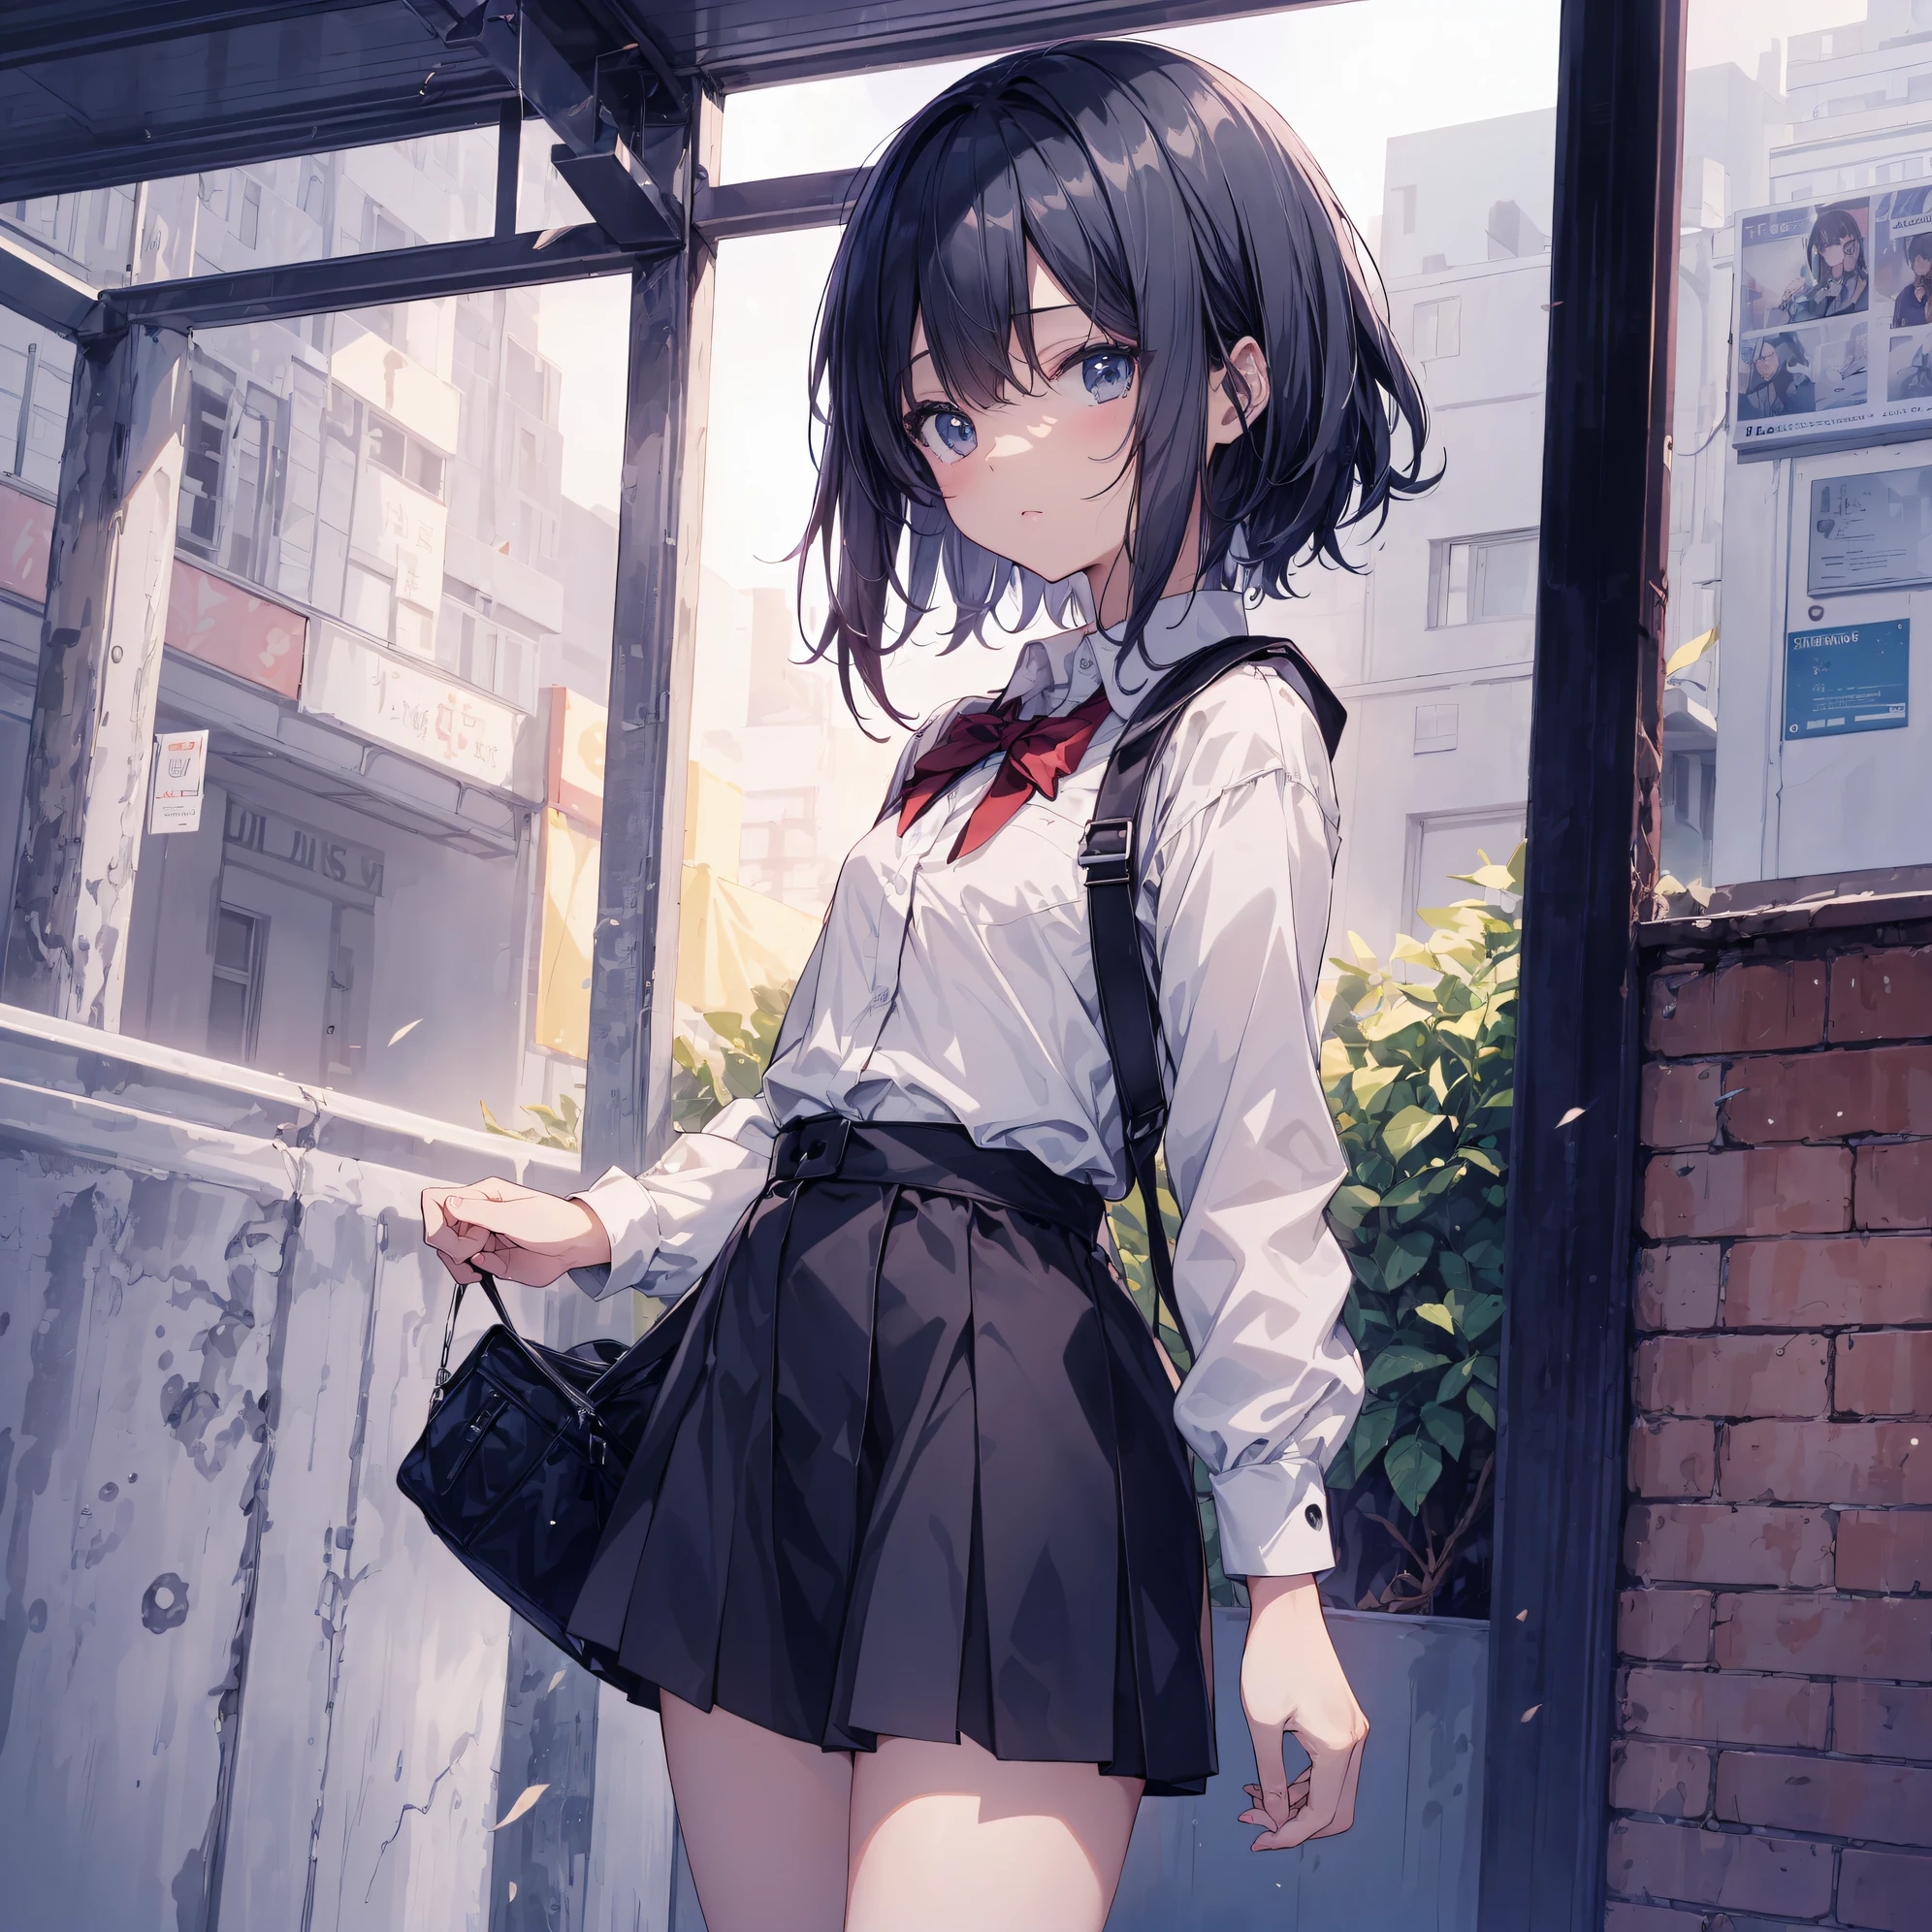 divine top quality, Ultra-detailed, anime moe art style,Best Anime 8K Konachan Wallpapers,Pixiv Contest Winner,Perfect Anatomy, (Draw a girl sleepily walking to school. ),BREAK, 1girl is a cool beautiful girl, (Solo,,,13years:1.3),a junior high school student, Androgynous attraction, (Center part very short hair),hair messy, Forehead, Full limbs, complete fingers,flat chest, Small butt, groin, Small eyes,Beautiful detailed black eyes,Well-proportioned iris and pupils,disgusted eye, , Skirt,On the way to school. BREAK,High resolution,super detailed skin, The best lighting powered by AI, 8K, Illustration,